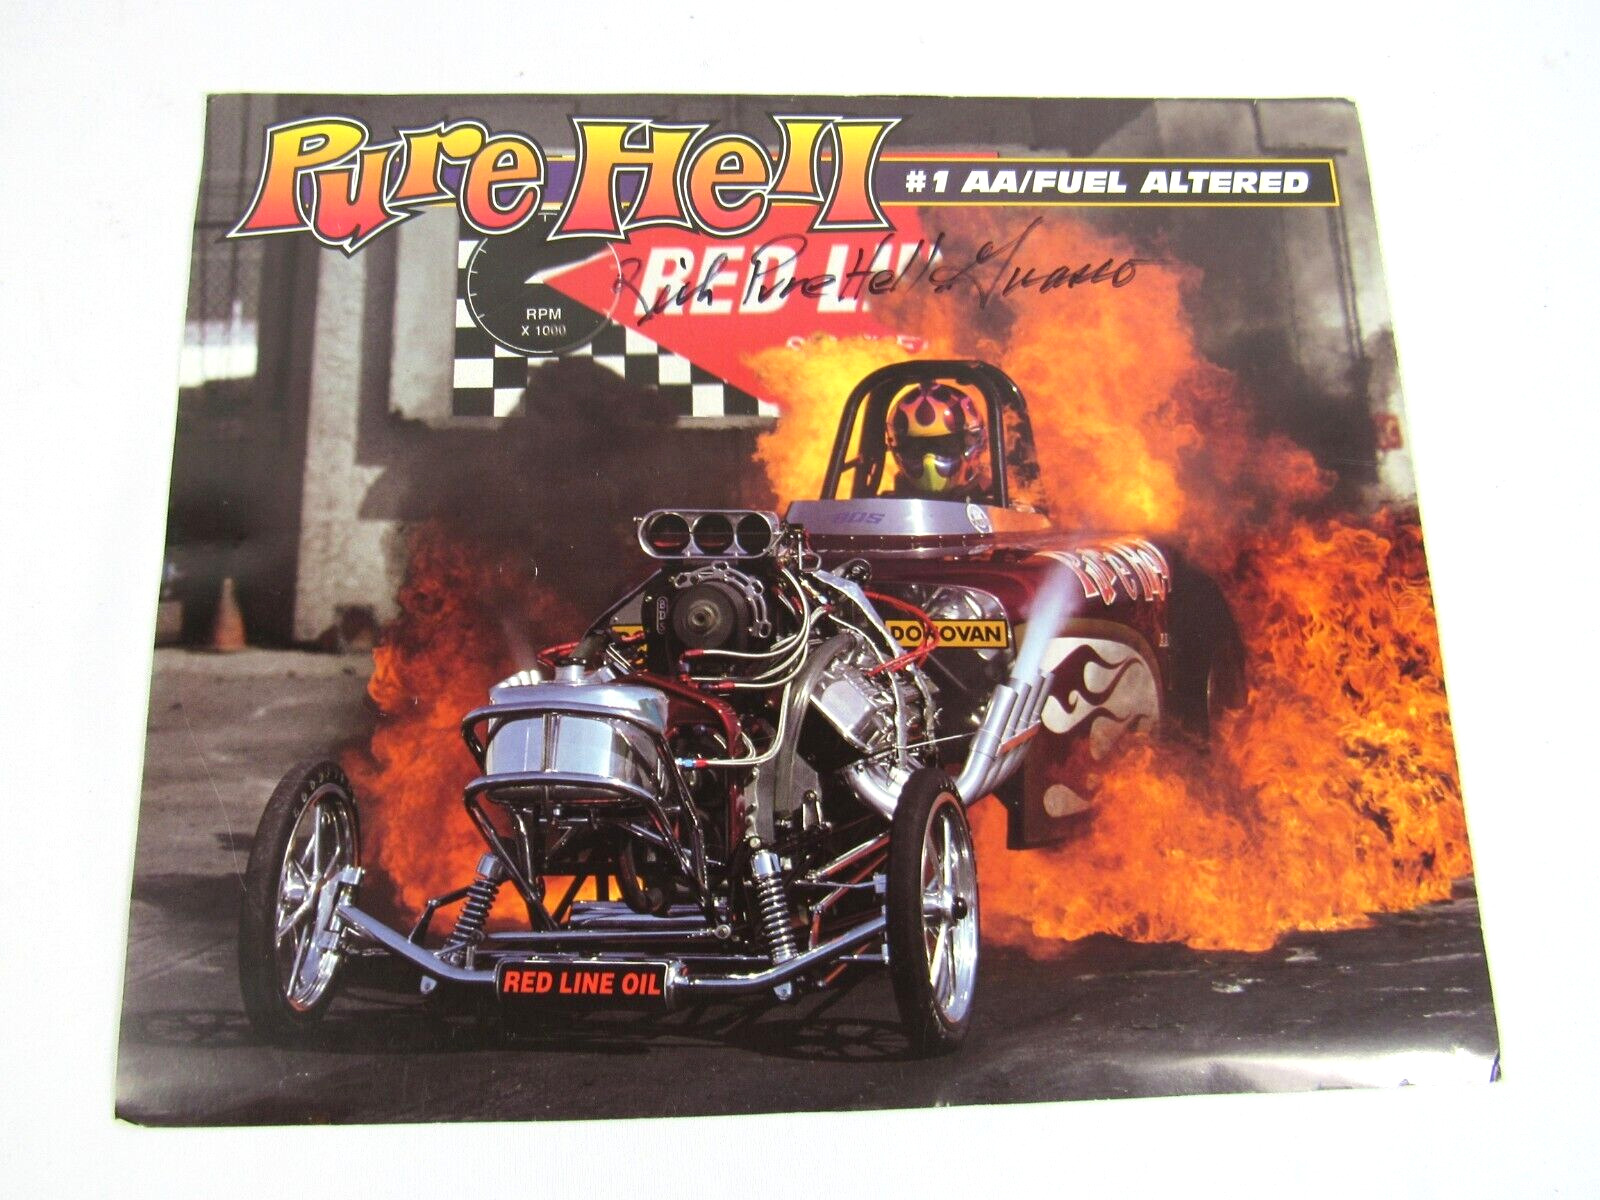 Pure Hell AA/Fuel Altered Drag Picture 8.5x10.25 Rich Guasco Signed Autograph